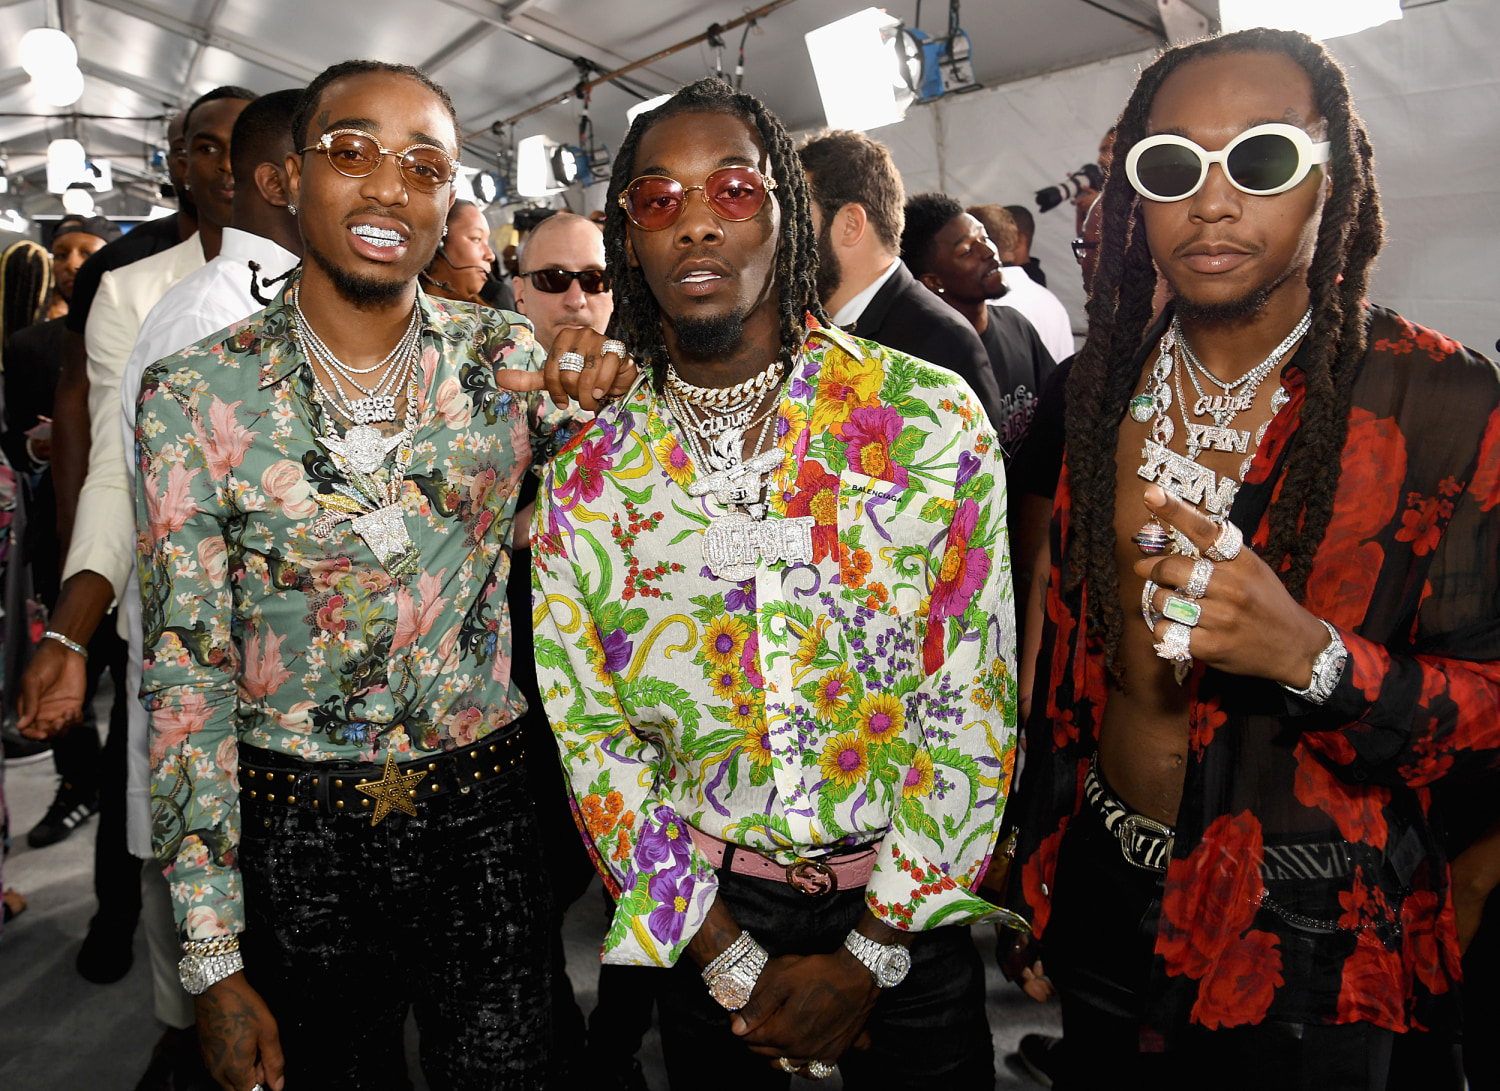 Flytte Hovedsagelig kyst Rap Group Migos Kicked Off Delta Flight, Manager Claims Racial Profiling